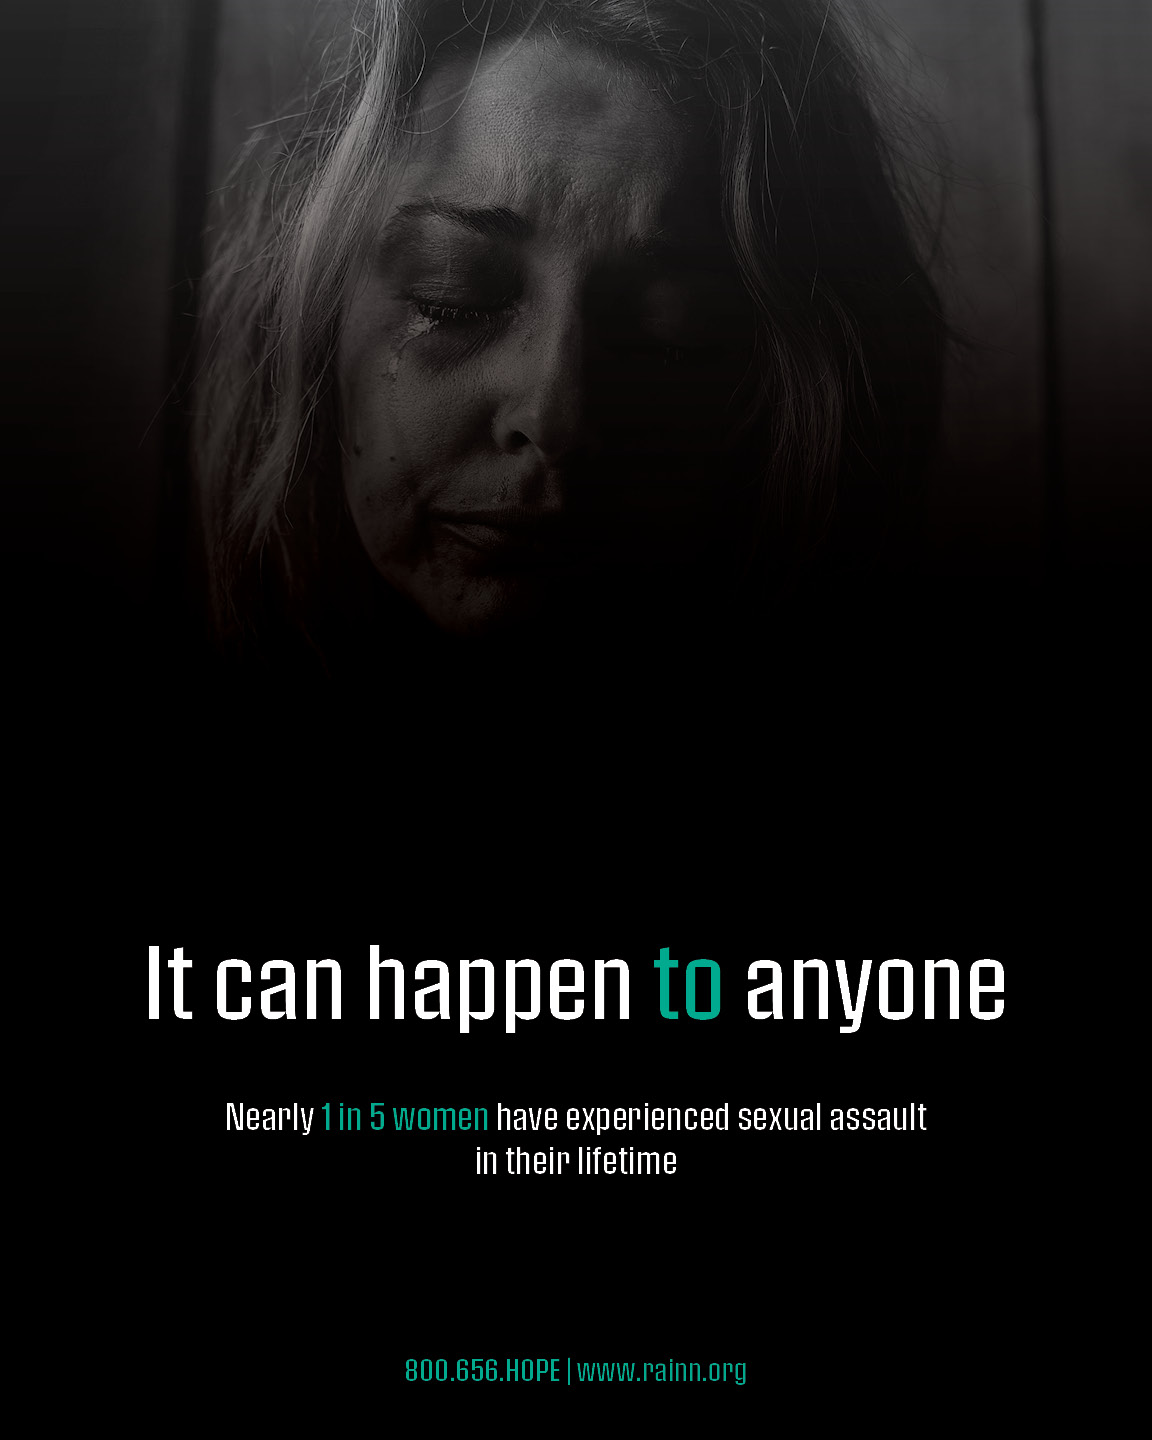 Final version of PSA poster of woman